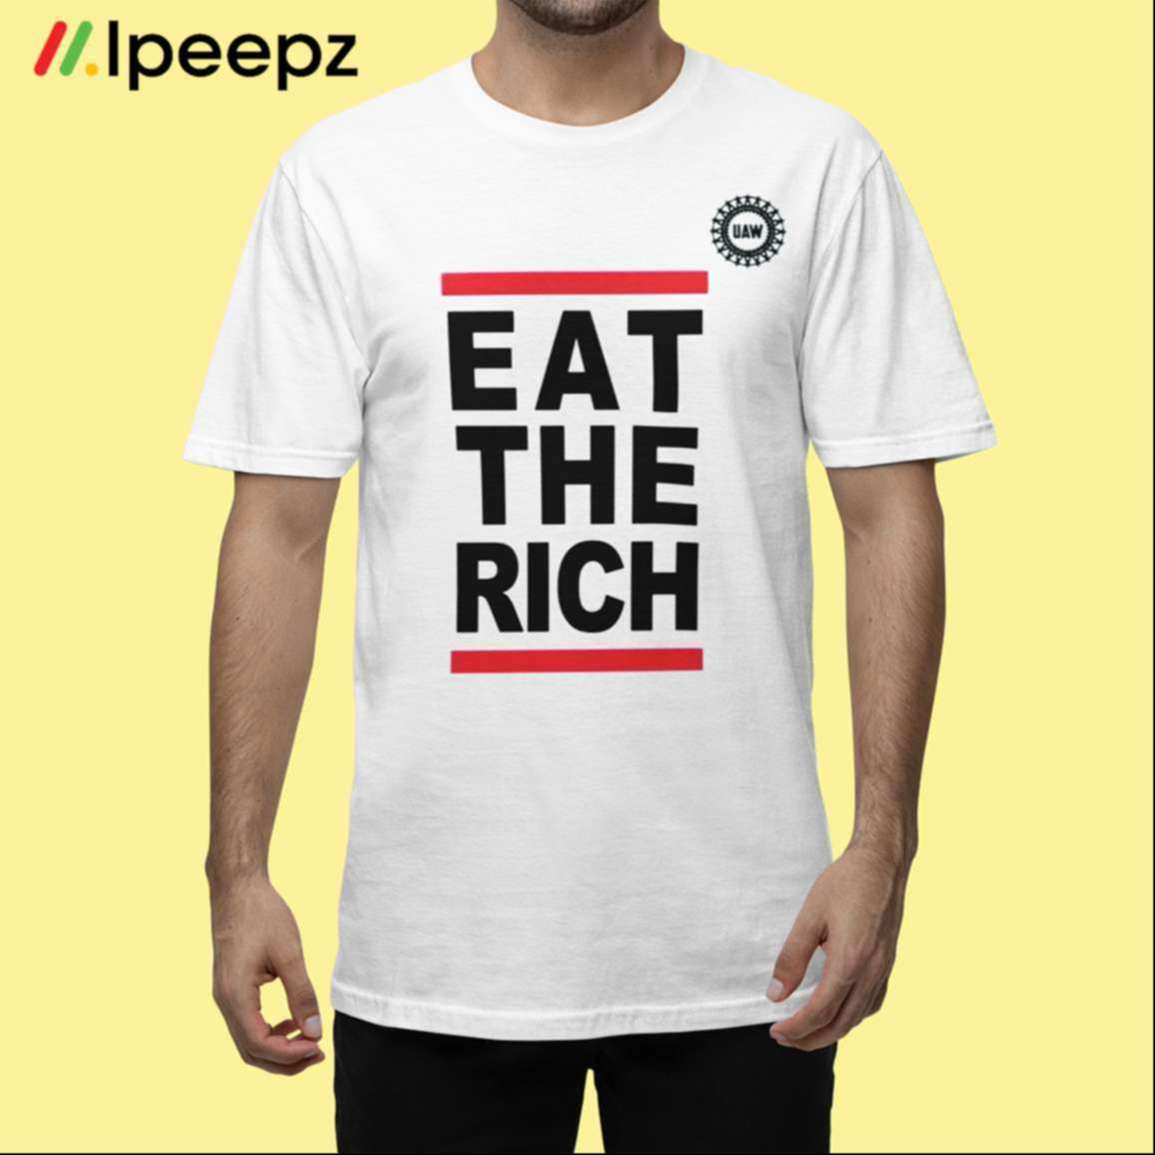 Uaw President Shawn Fain Caused Controversy With His Eat The Rich Shirt